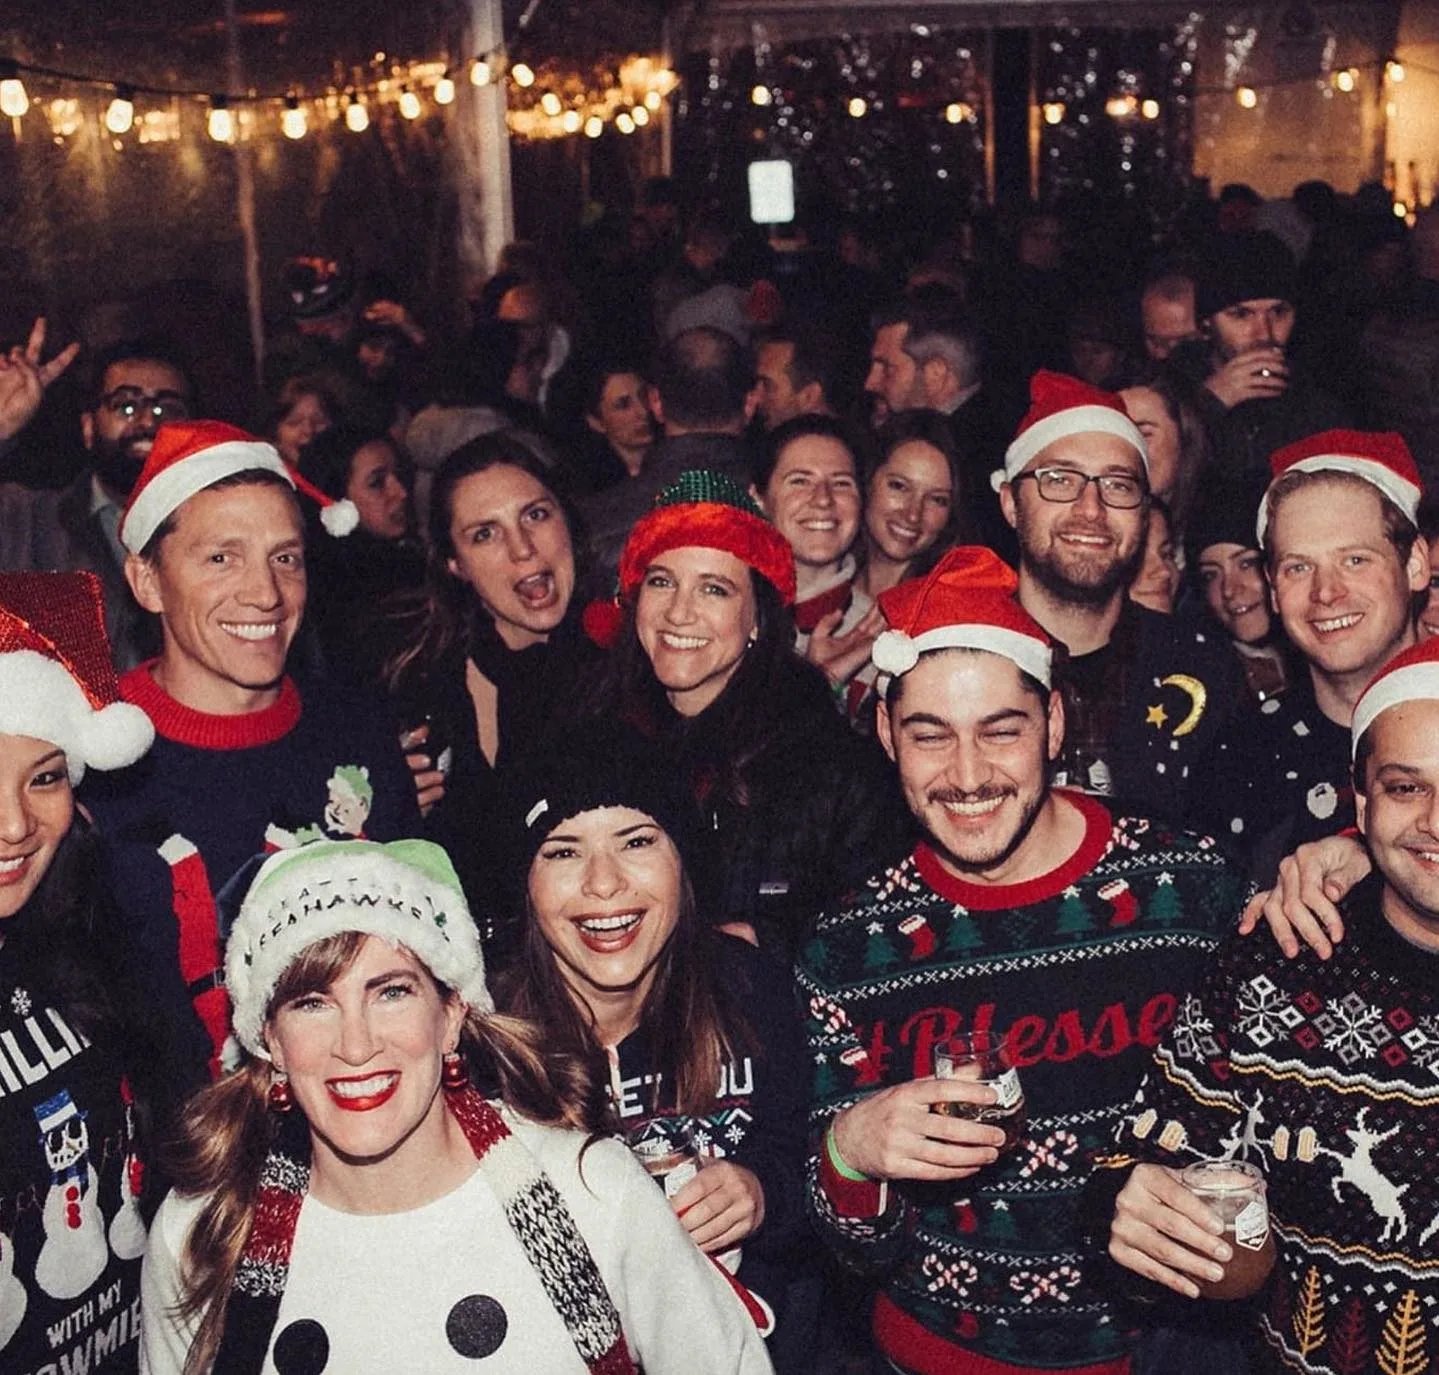 A group of people pose together in Christmas garb and Santa hats.